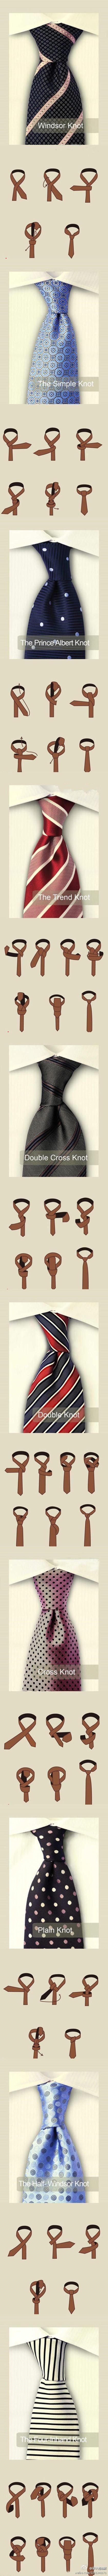 How to Tie a Tie